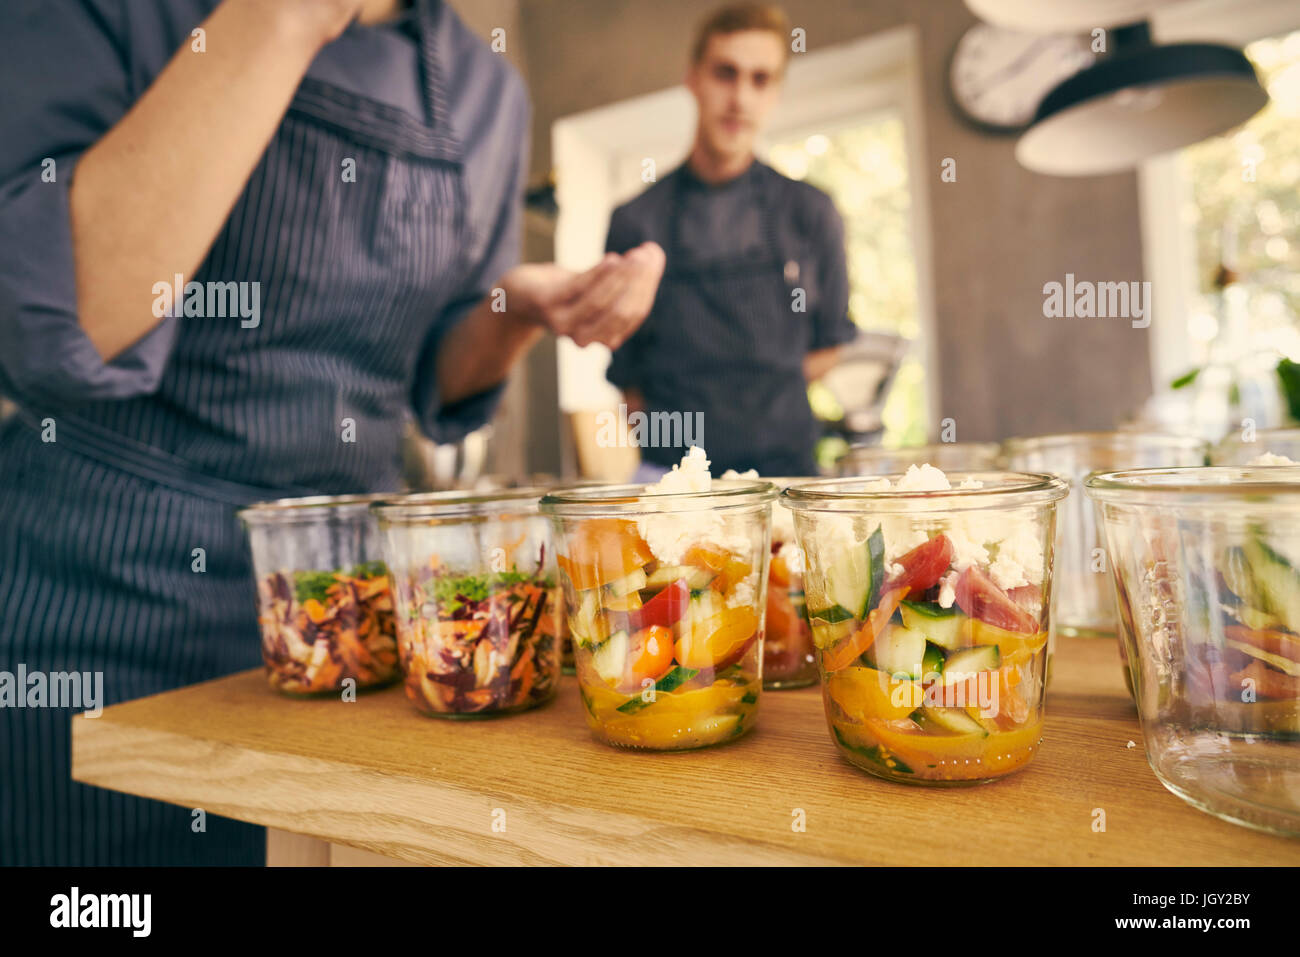 Chef filling plastic containers with portions of food Stock Photo